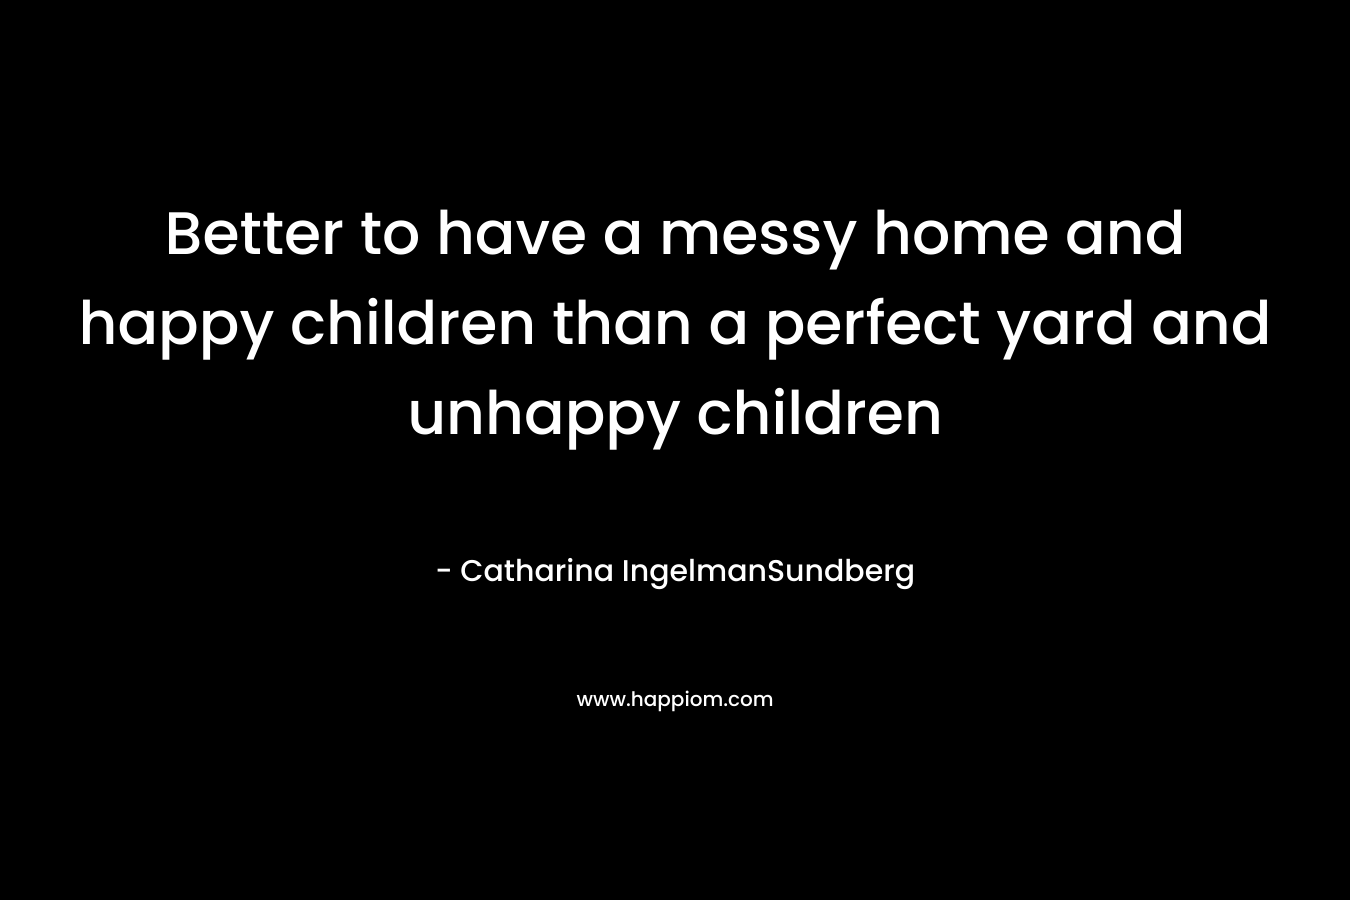 Better to have a messy home and happy children than a perfect yard and unhappy children